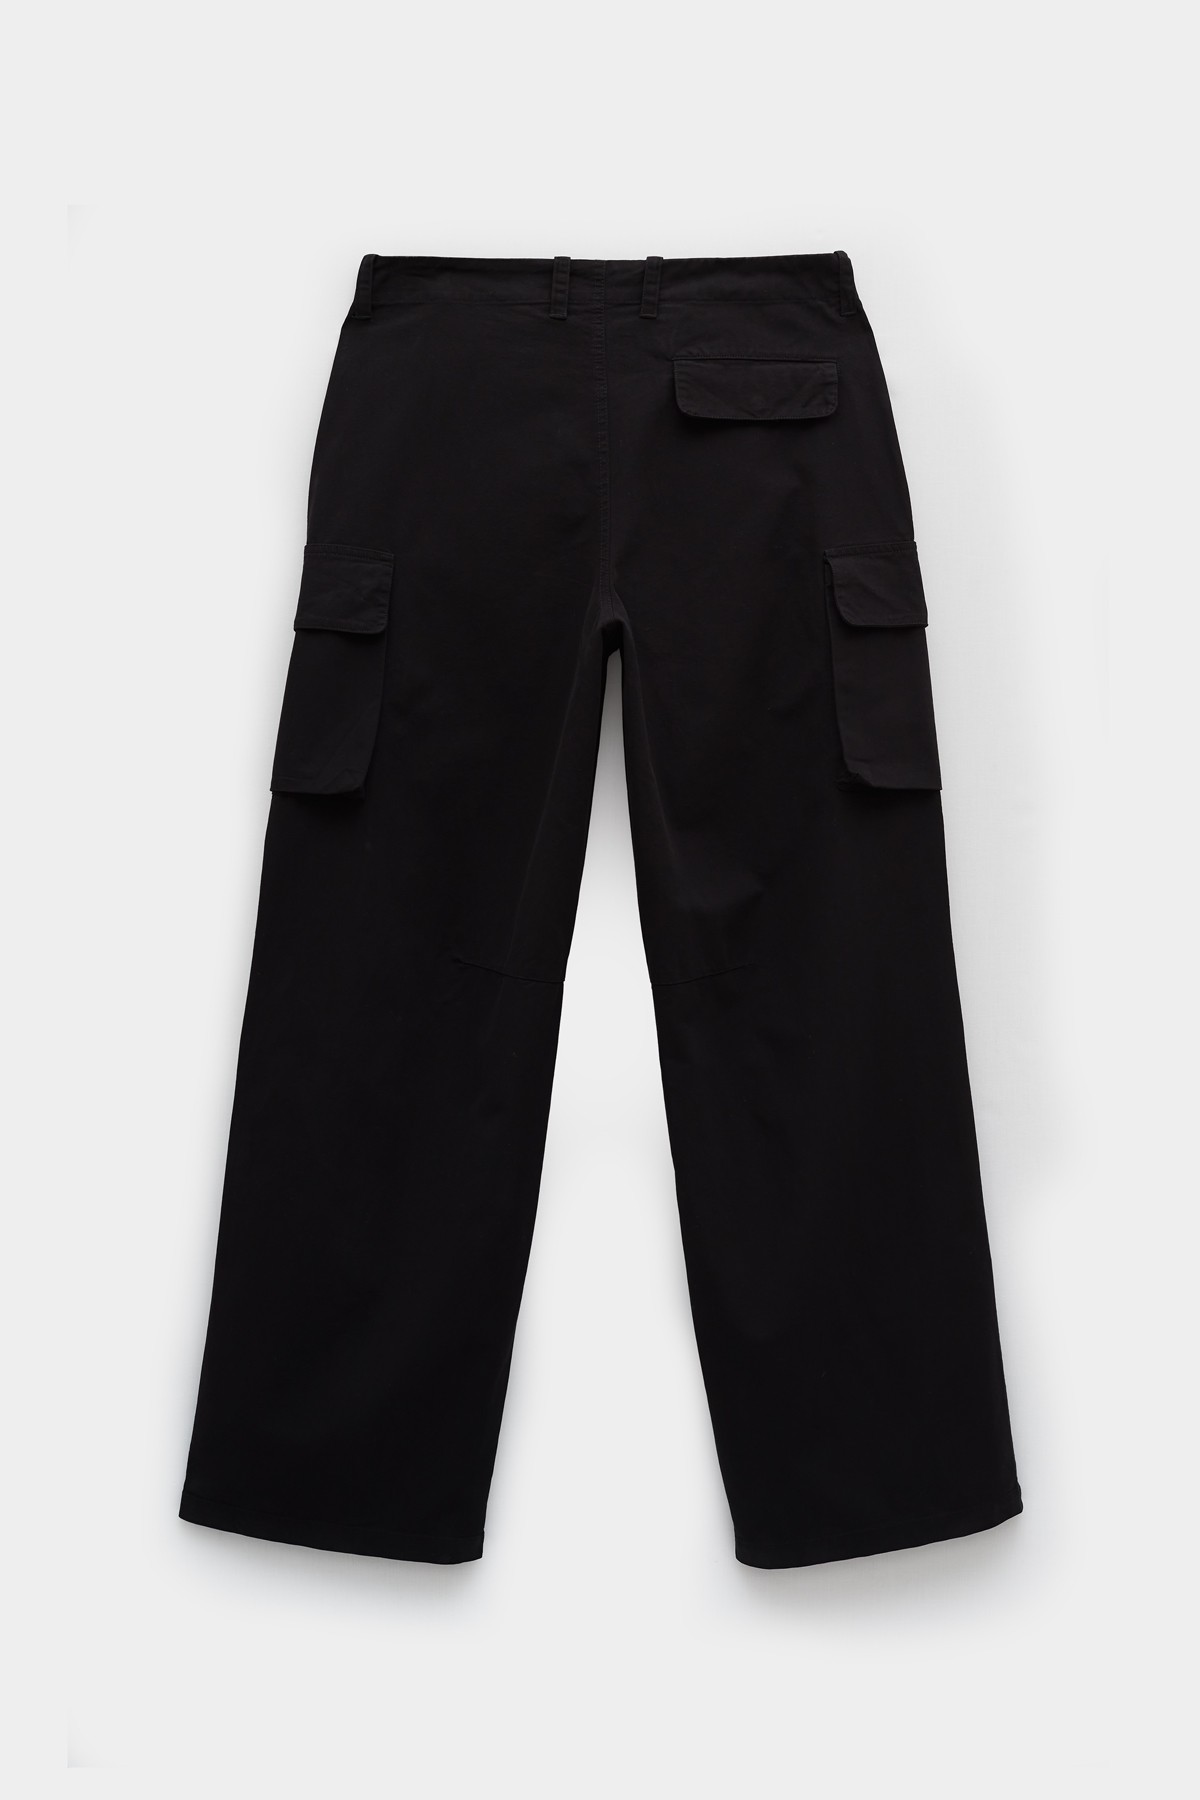 our legacy mount cargo pants 46 - パンツ